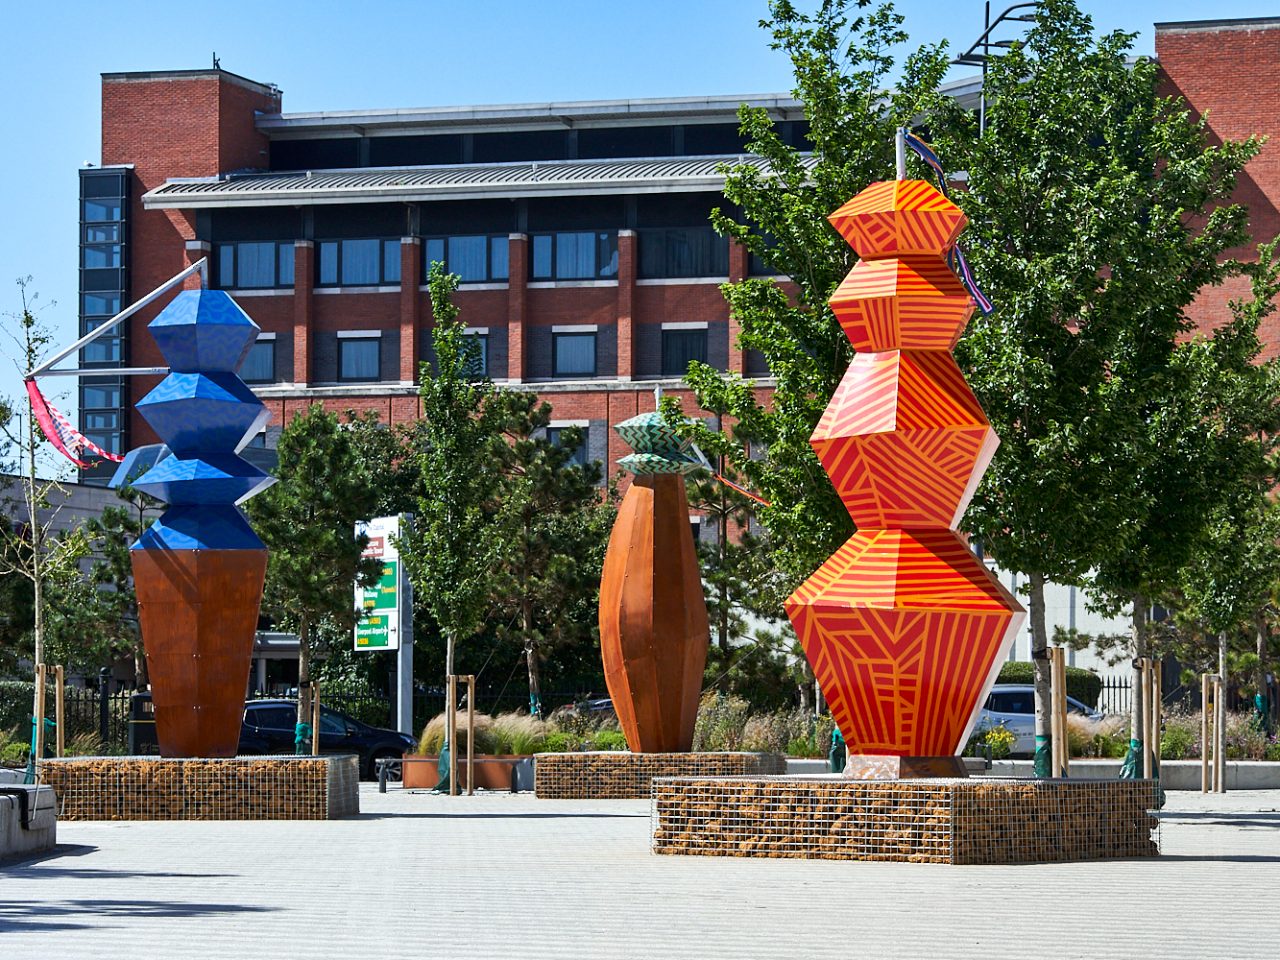 Three totems on Princes Dock, one geometrically painted red and yellow, one painted blue and the bottom half is covered in rust and the last is almost entirely covered in rust except for its green top